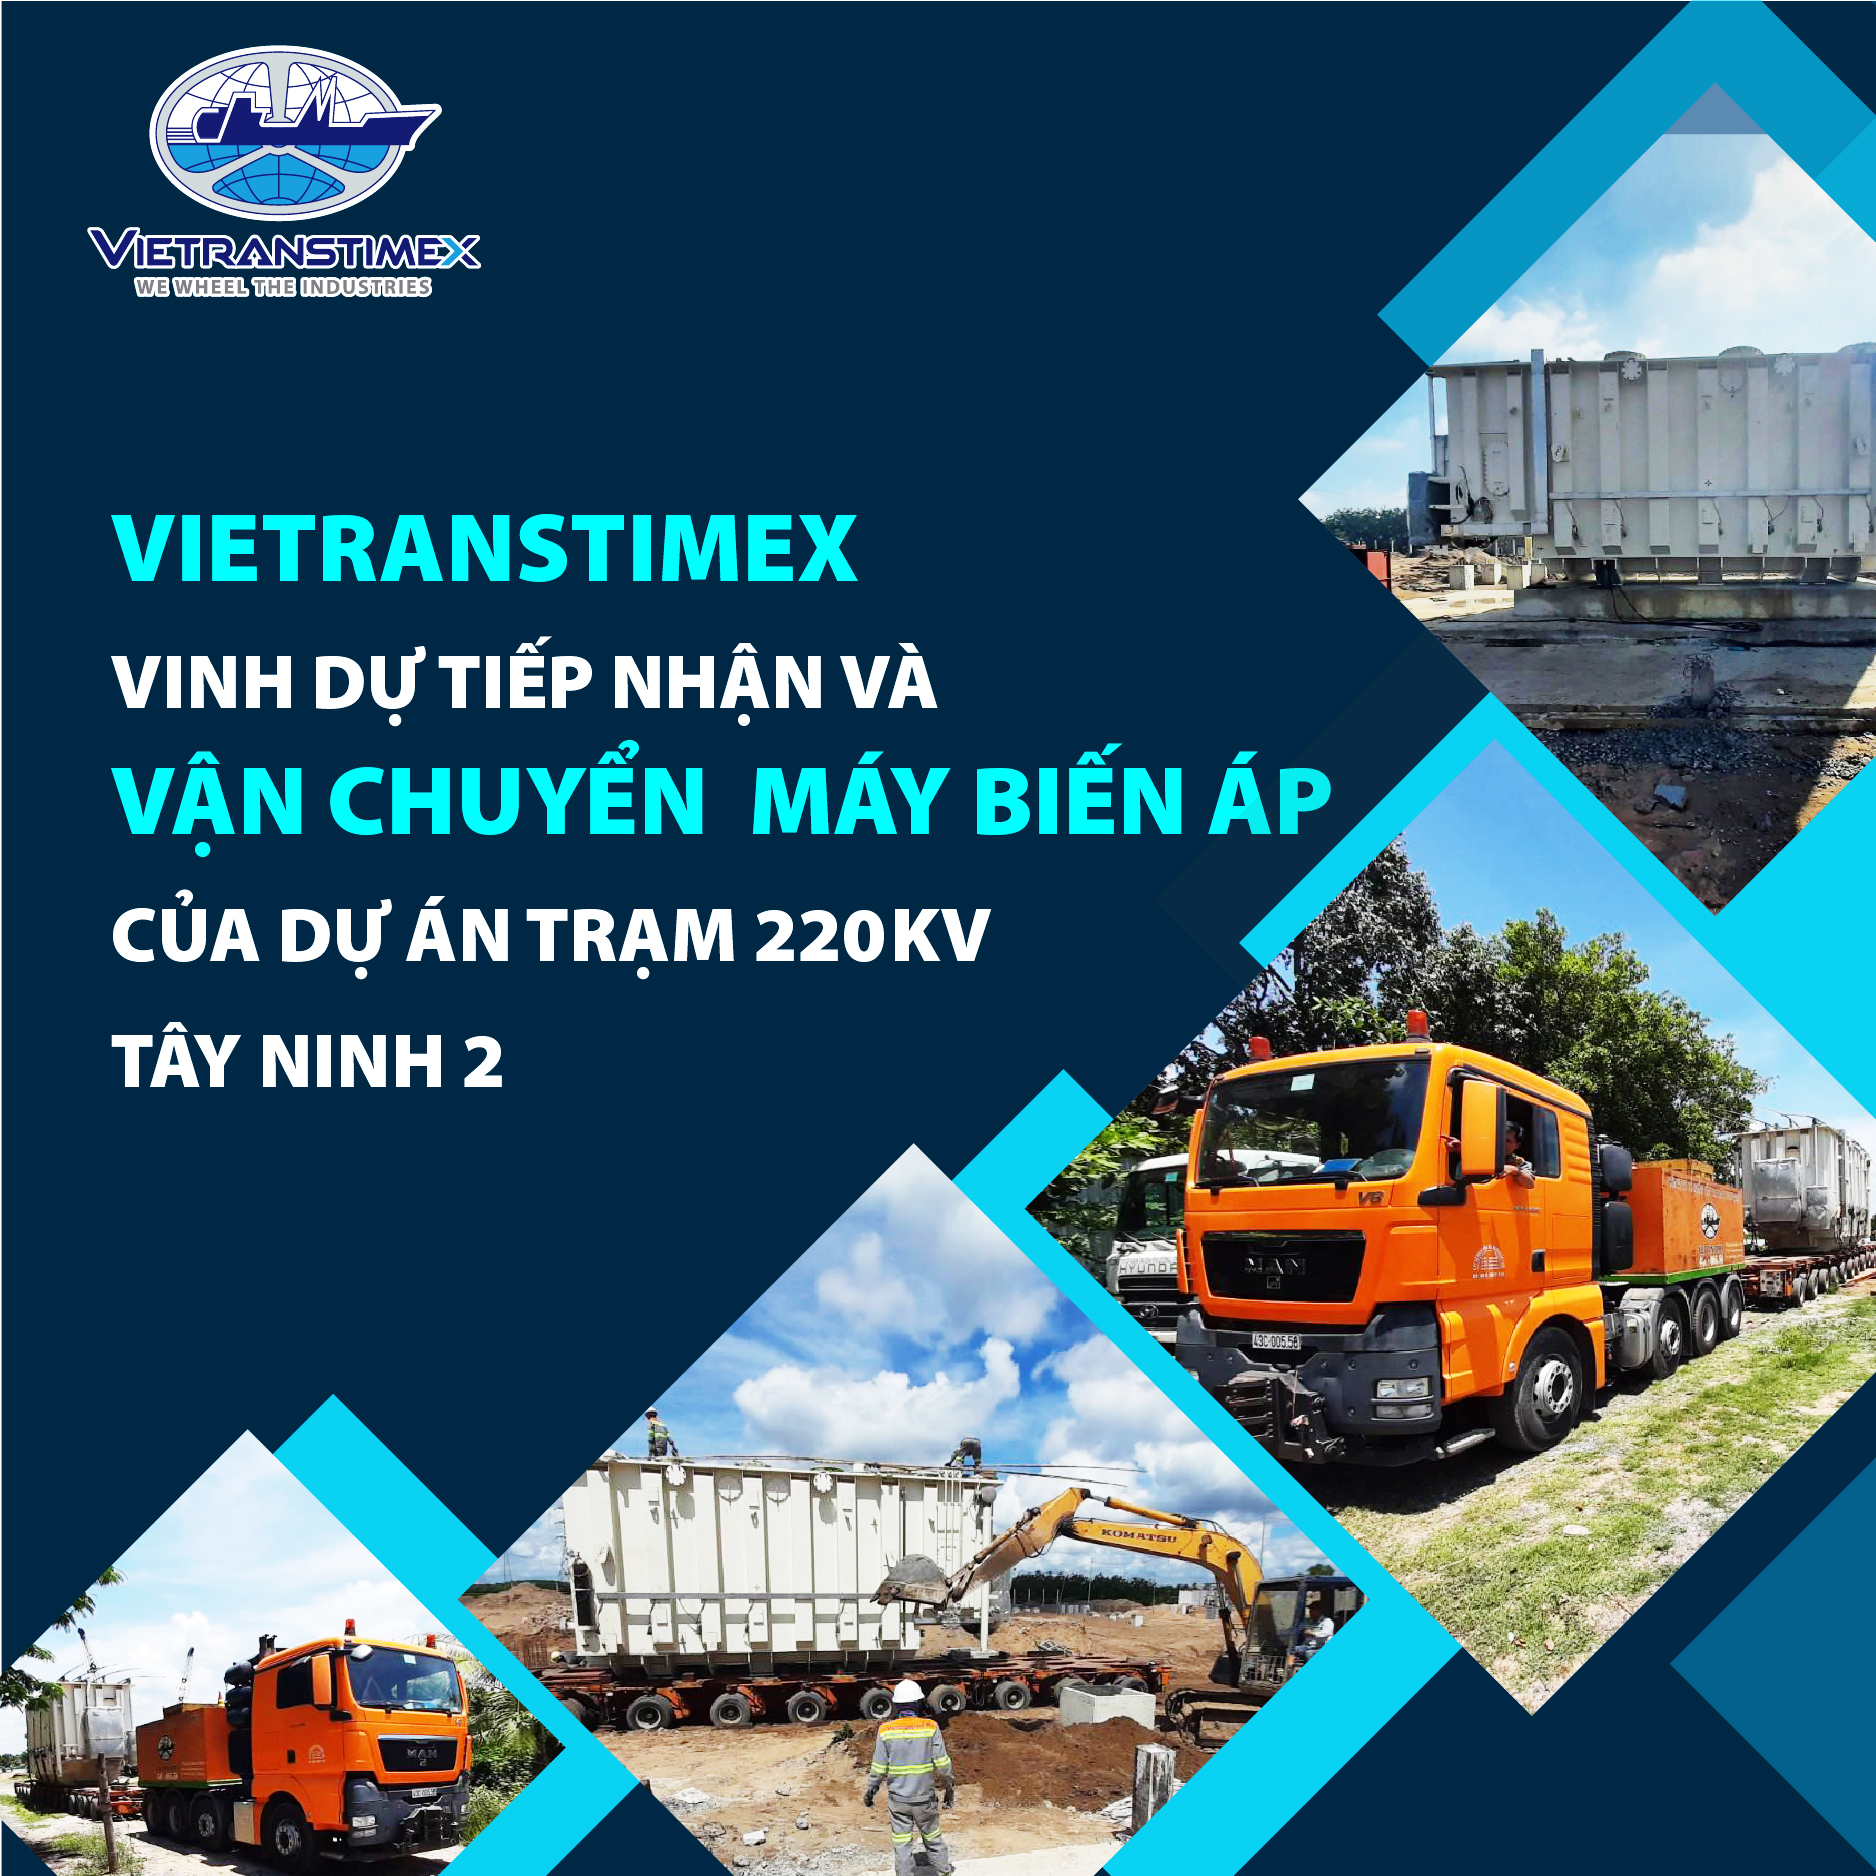 Vietranstimex is honored to transport the transformers of the Tay Ninh 2 220 kV station project